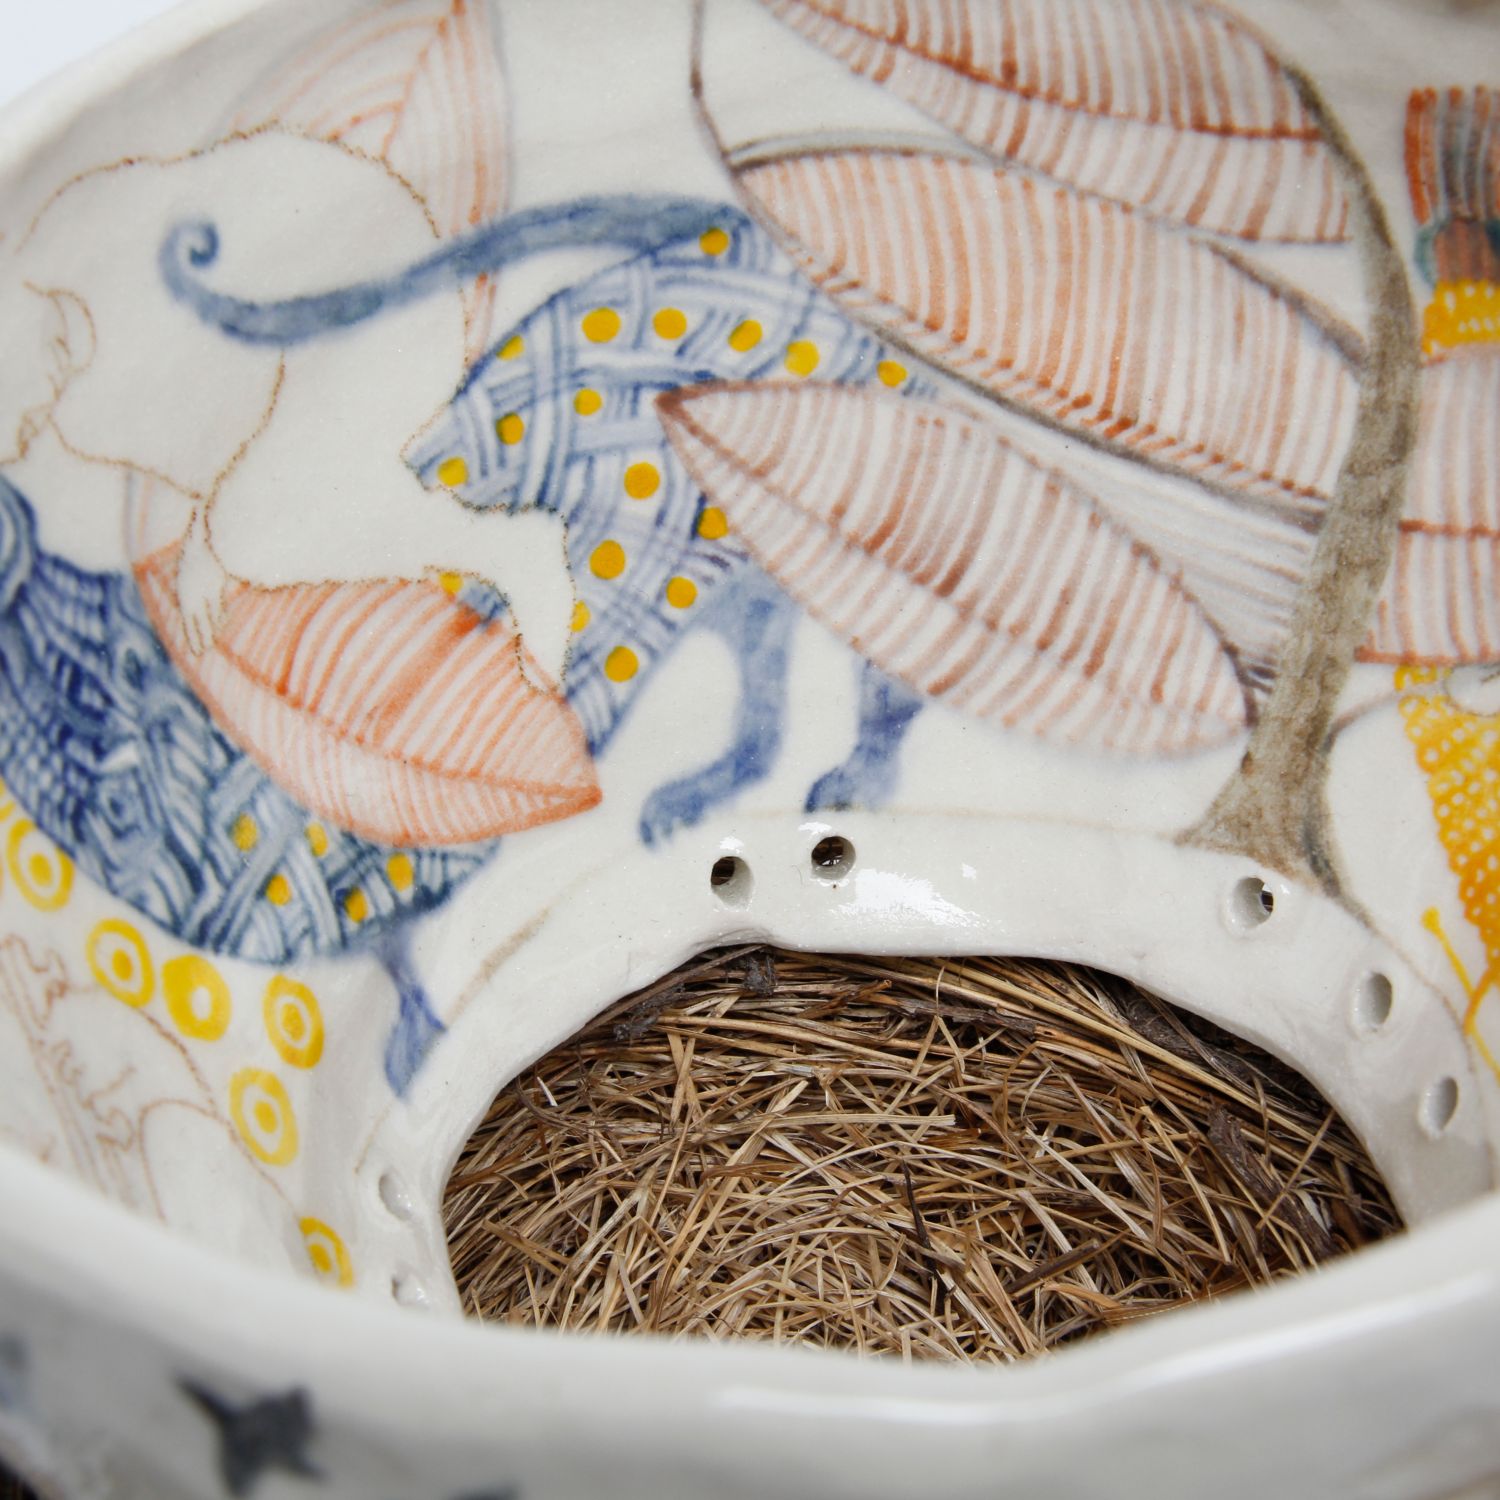 Japneet Kaur: Nesting Bowl – Hollow Bowl (Each sold separately) Product Image 2 of 7